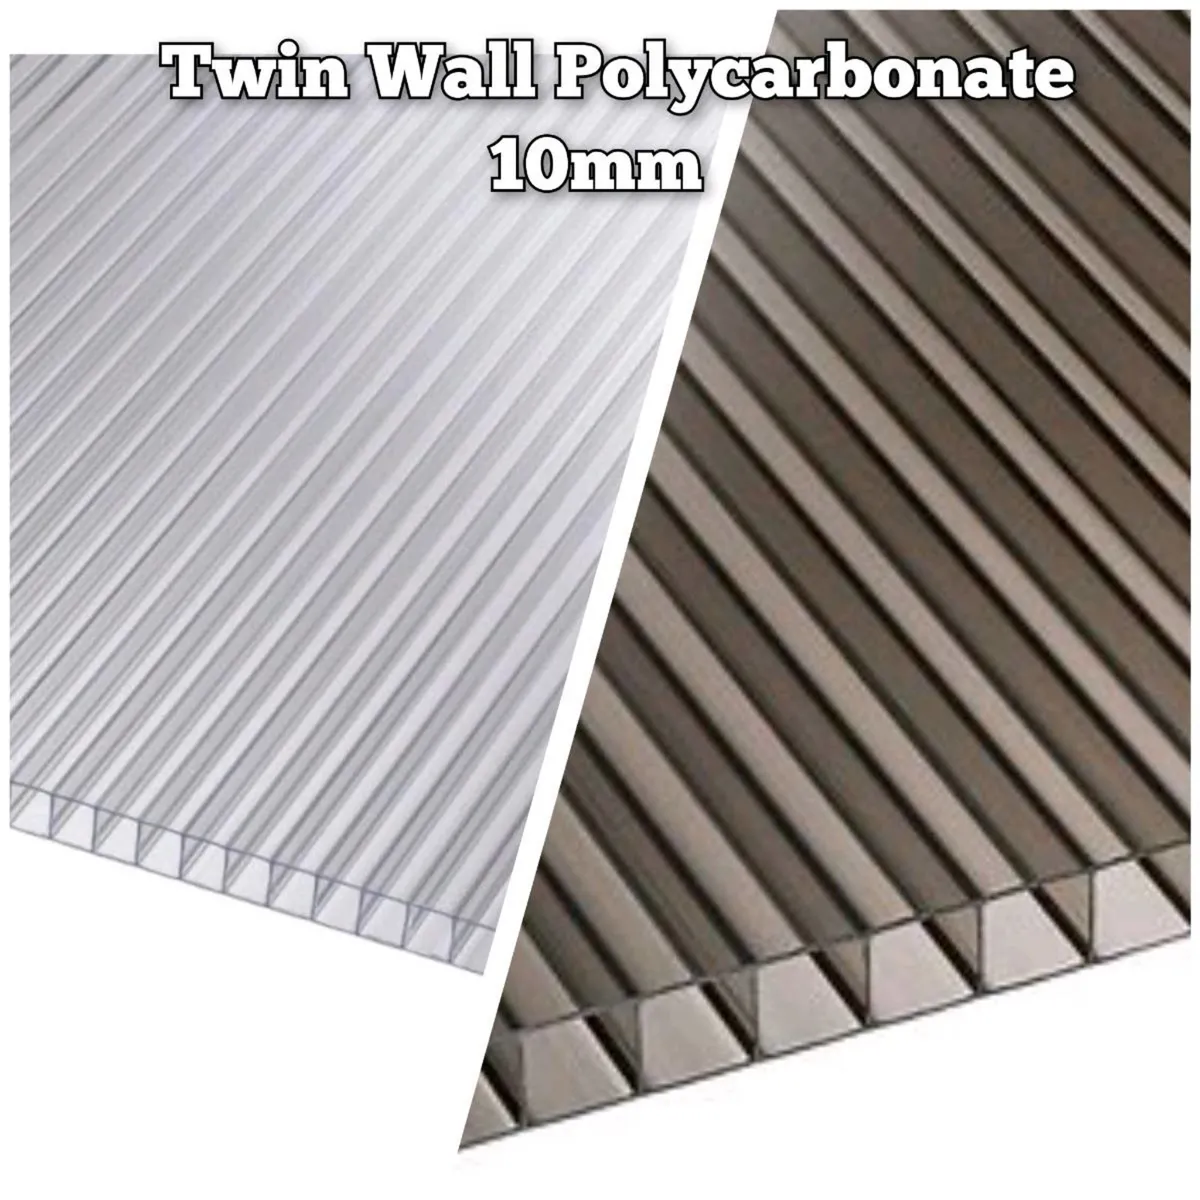 We are Supplying Polycarbonate Sheets - Image 1